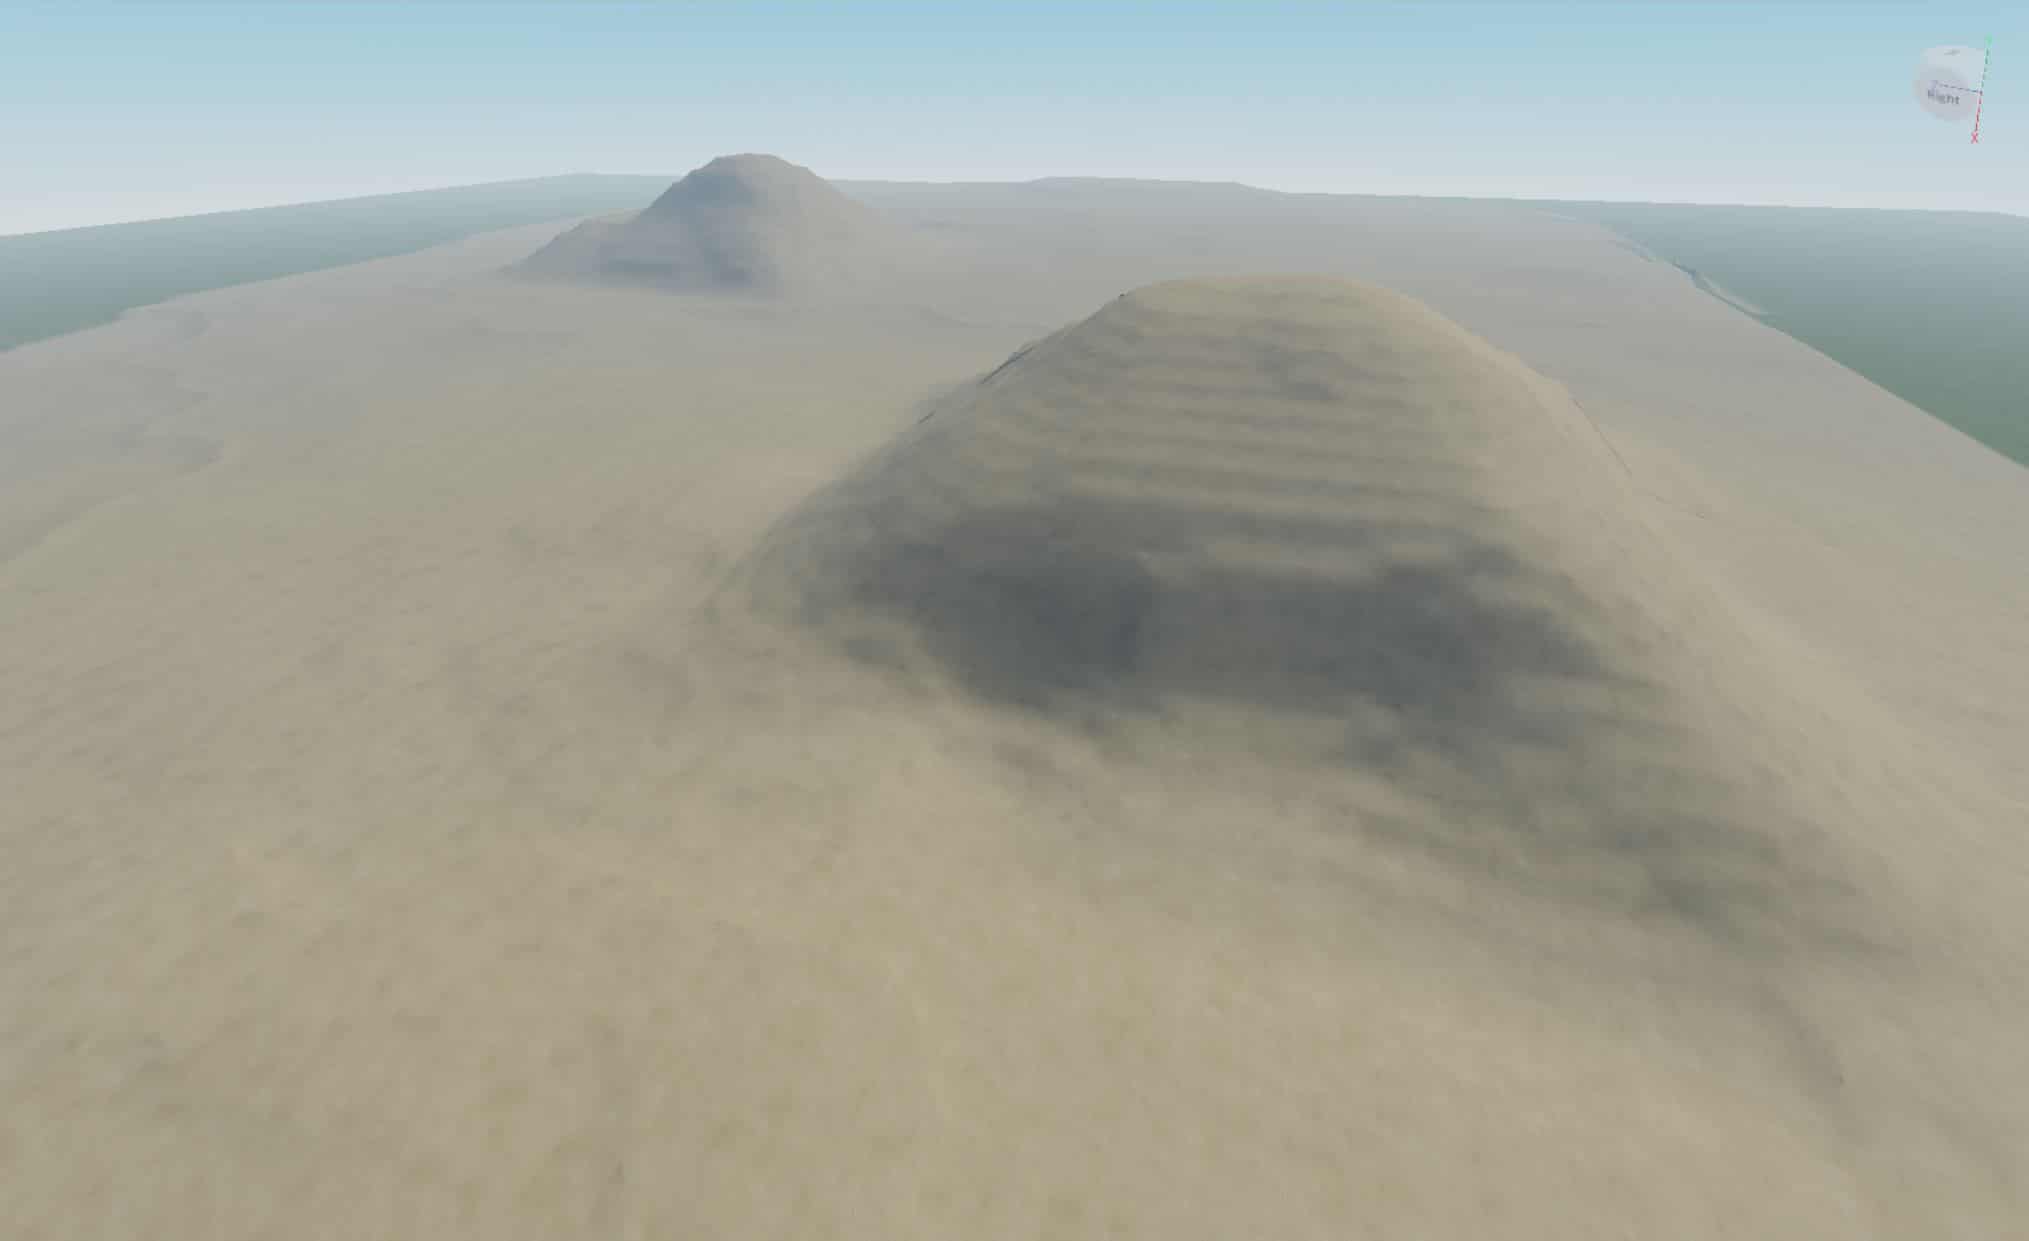 Create Roblox maps from real-world topographical data! – Equator